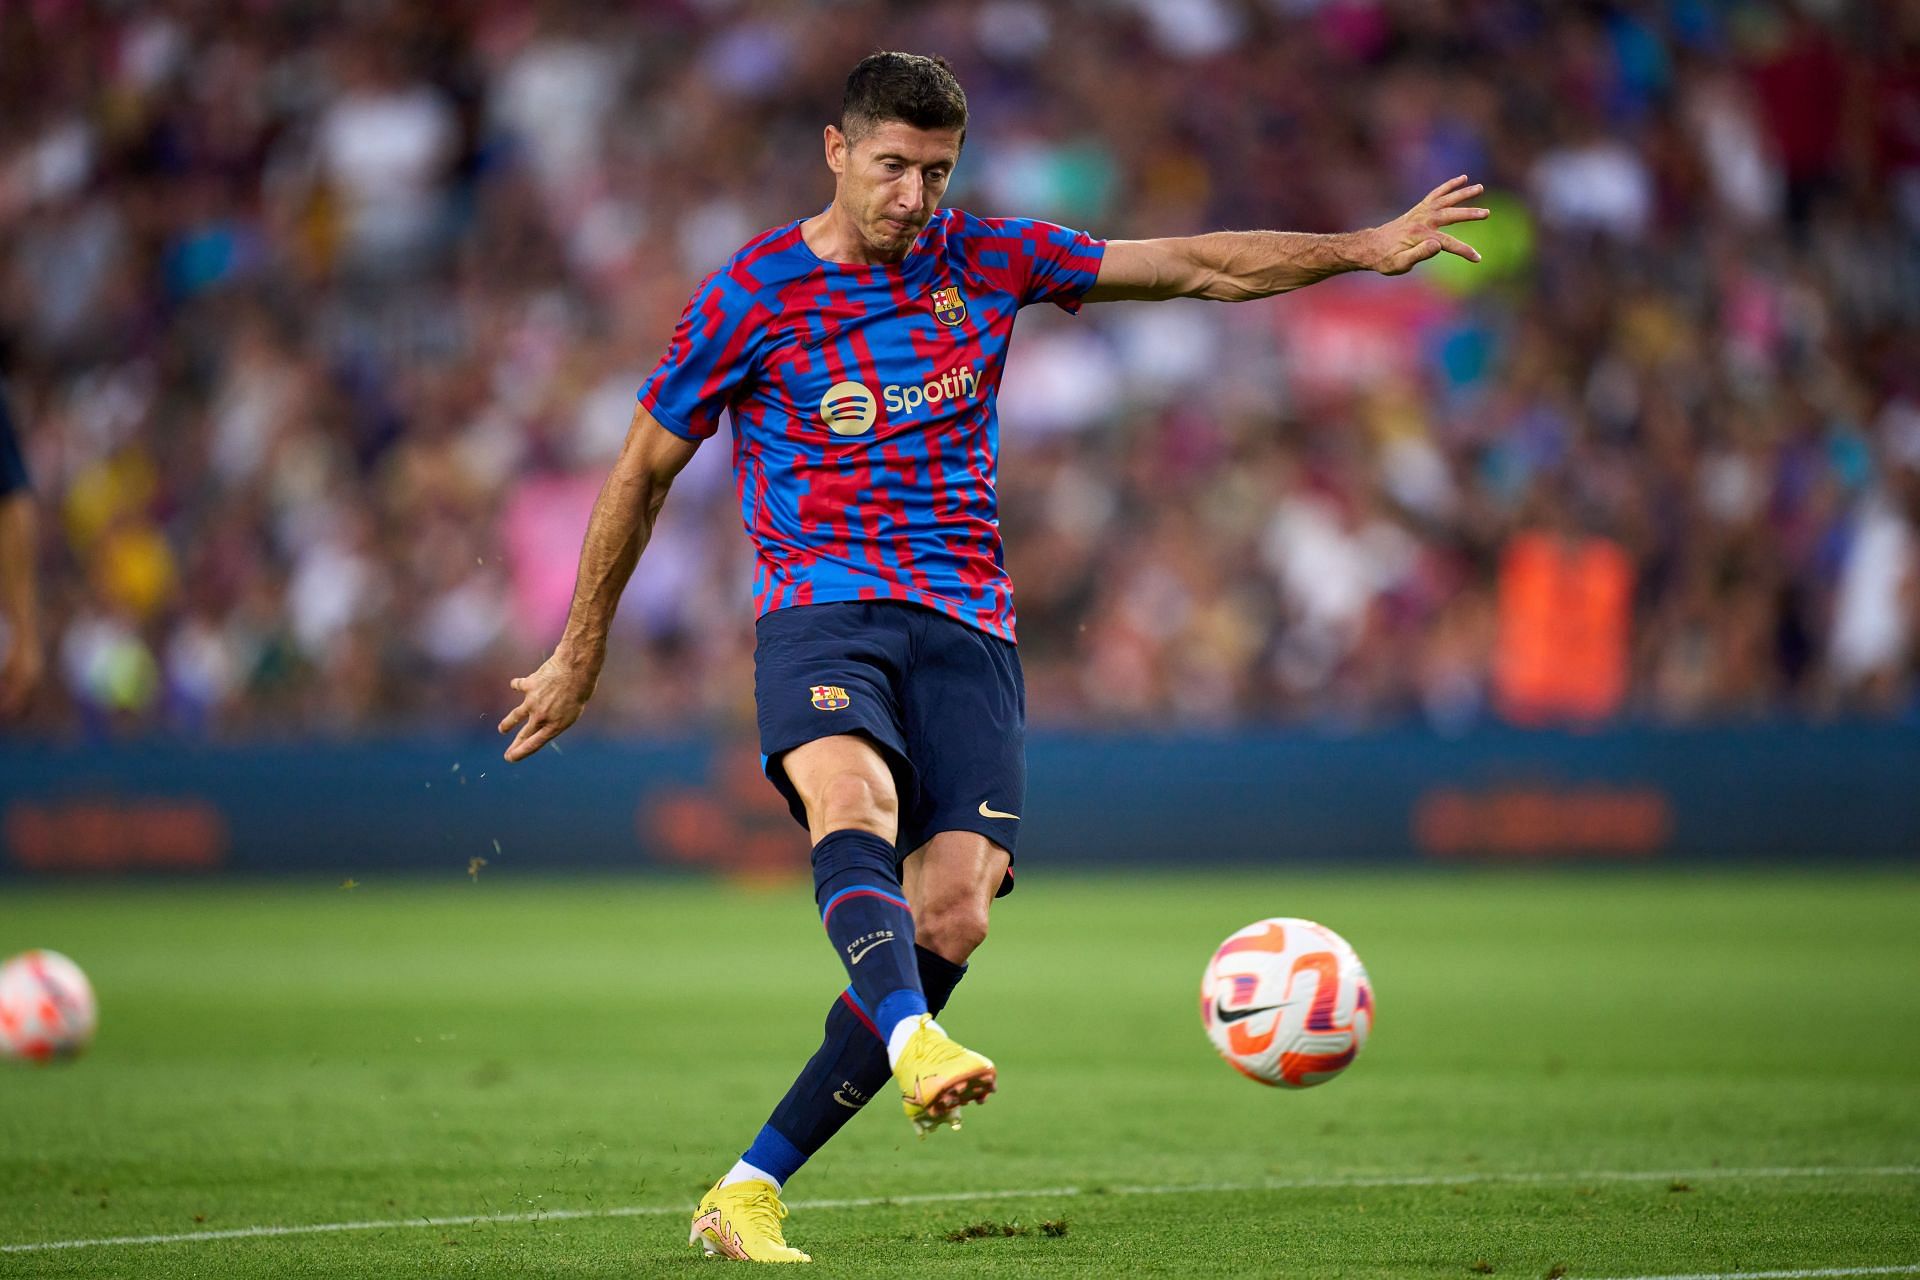 The Blaugrana have an impressive new-look squad